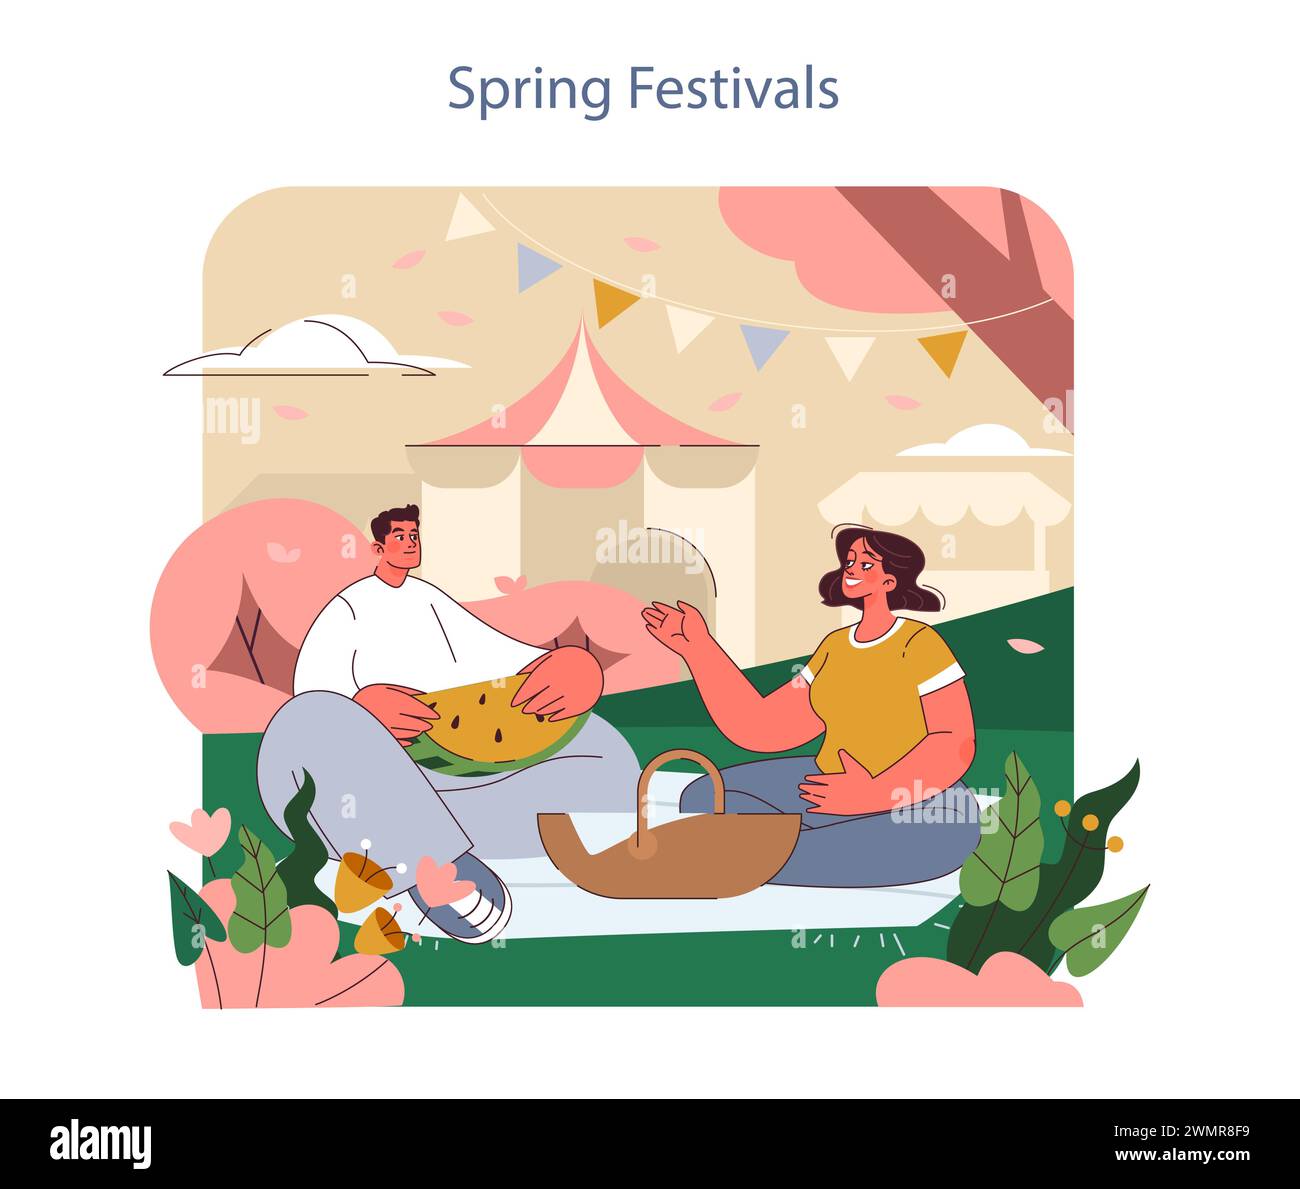 Spring Festivals concept. A couple enjoys a picnic, engaging in lively conversation under the festive tented pavilions. Stock Vector